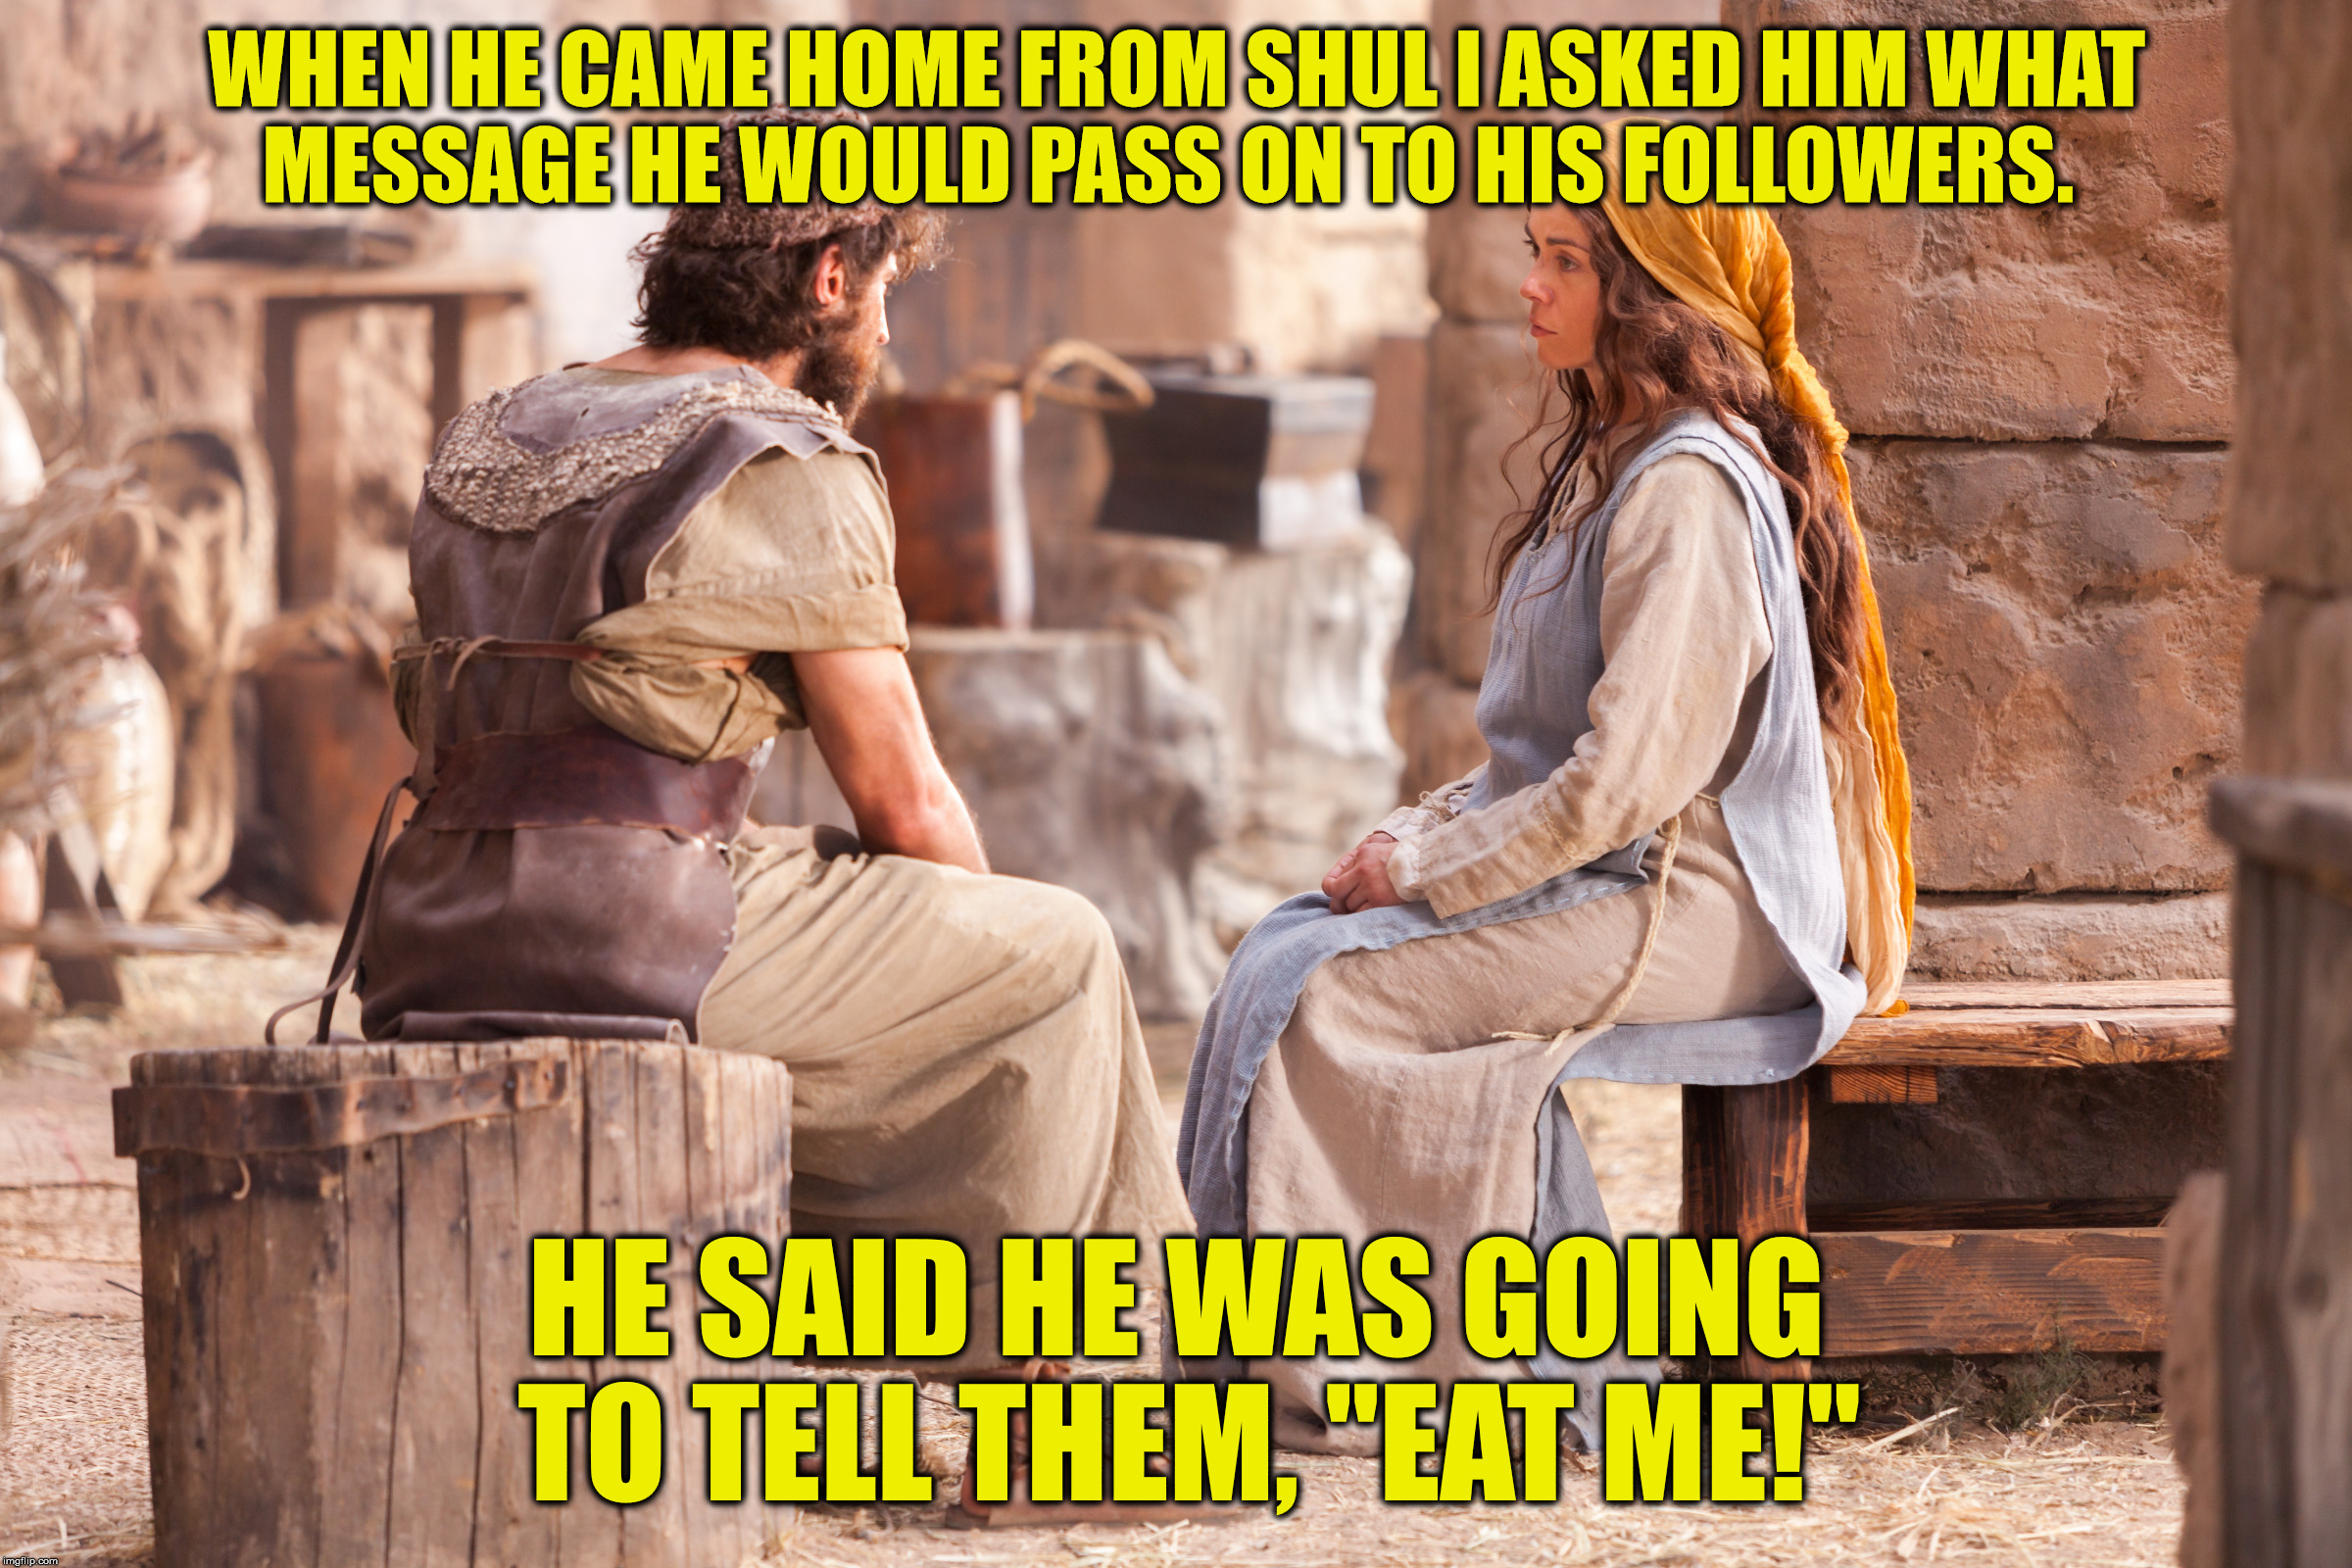 WHEN HE CAME HOME FROM SHUL I ASKED HIM WHAT MESSAGE HE WOULD PASS ON TO HIS FOLLOWERS. HE SAID HE WAS GOING TO TELL THEM, "EAT ME!" | made w/ Imgflip meme maker